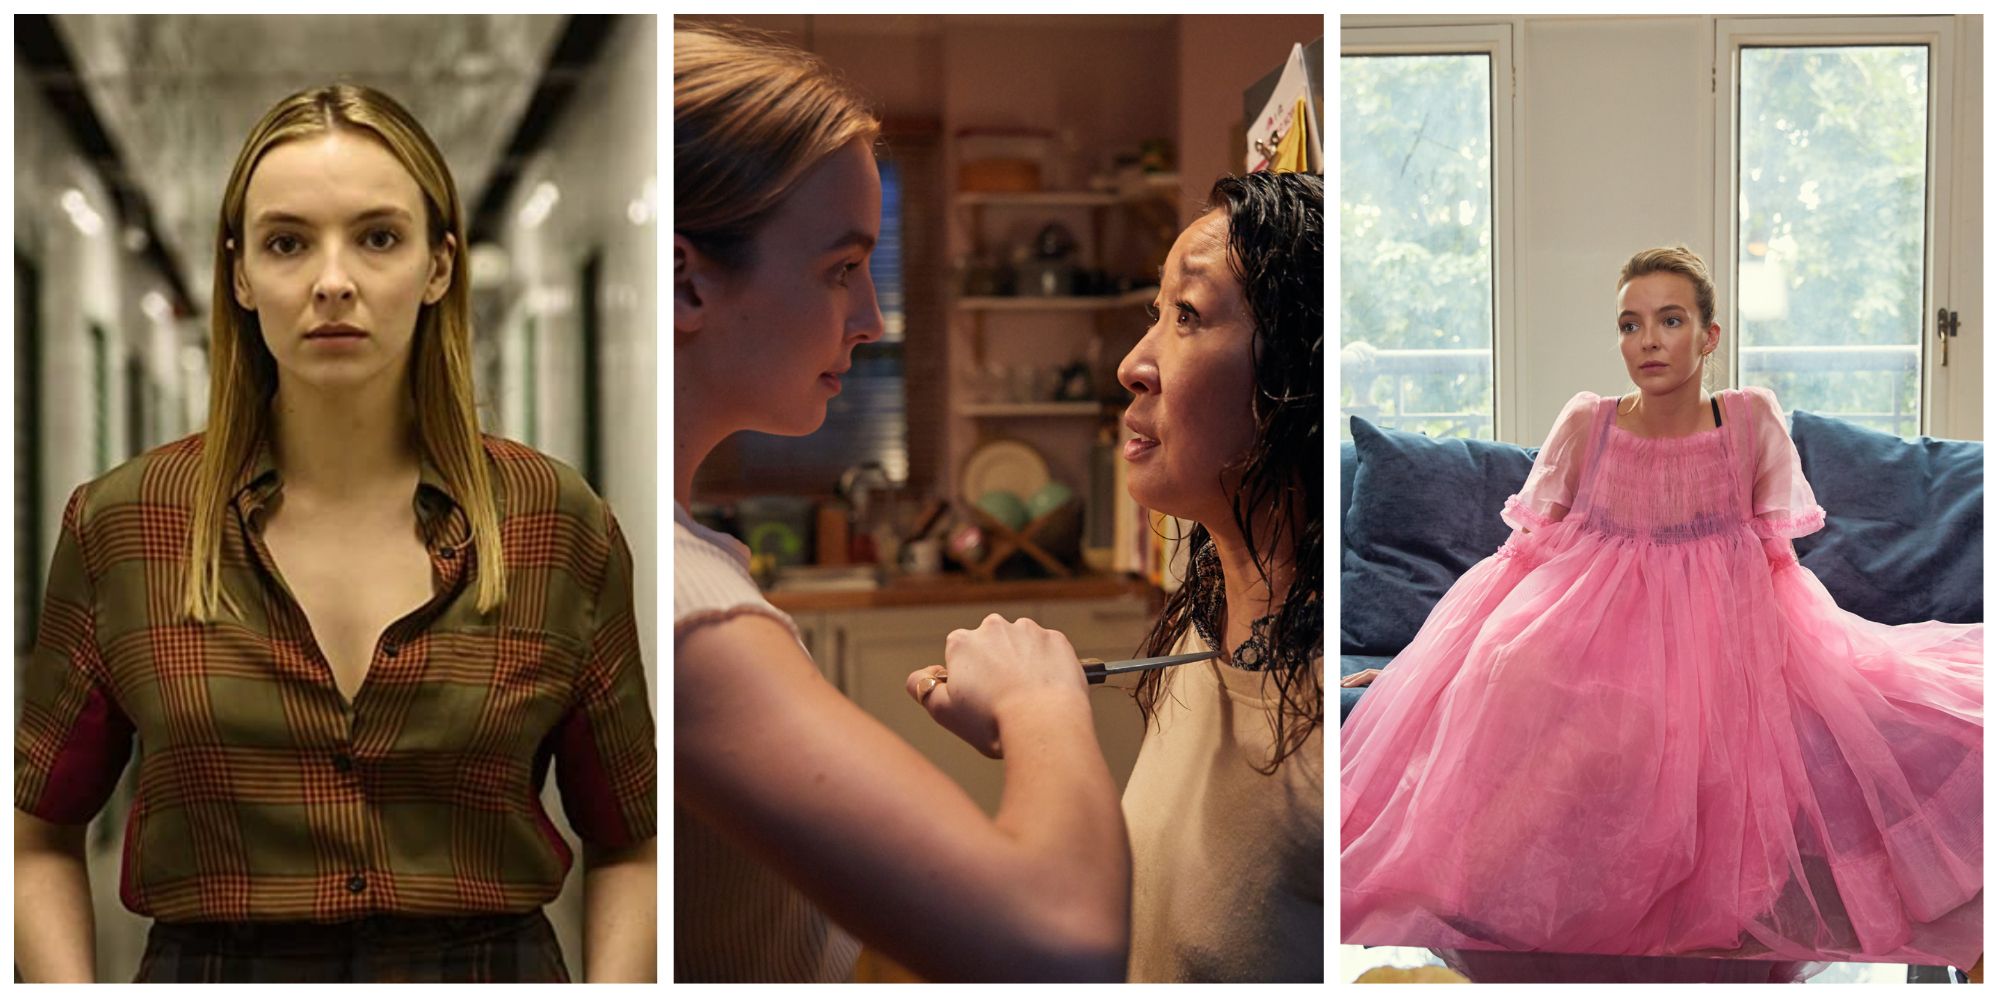 Left image: Villanelle staring at the camera. Middle image: Villanelle holding a knife up to Eve's throat whilst facing her. Right image: Villanelle in the iconic pink fluffy dress sat on a therapist's couch.